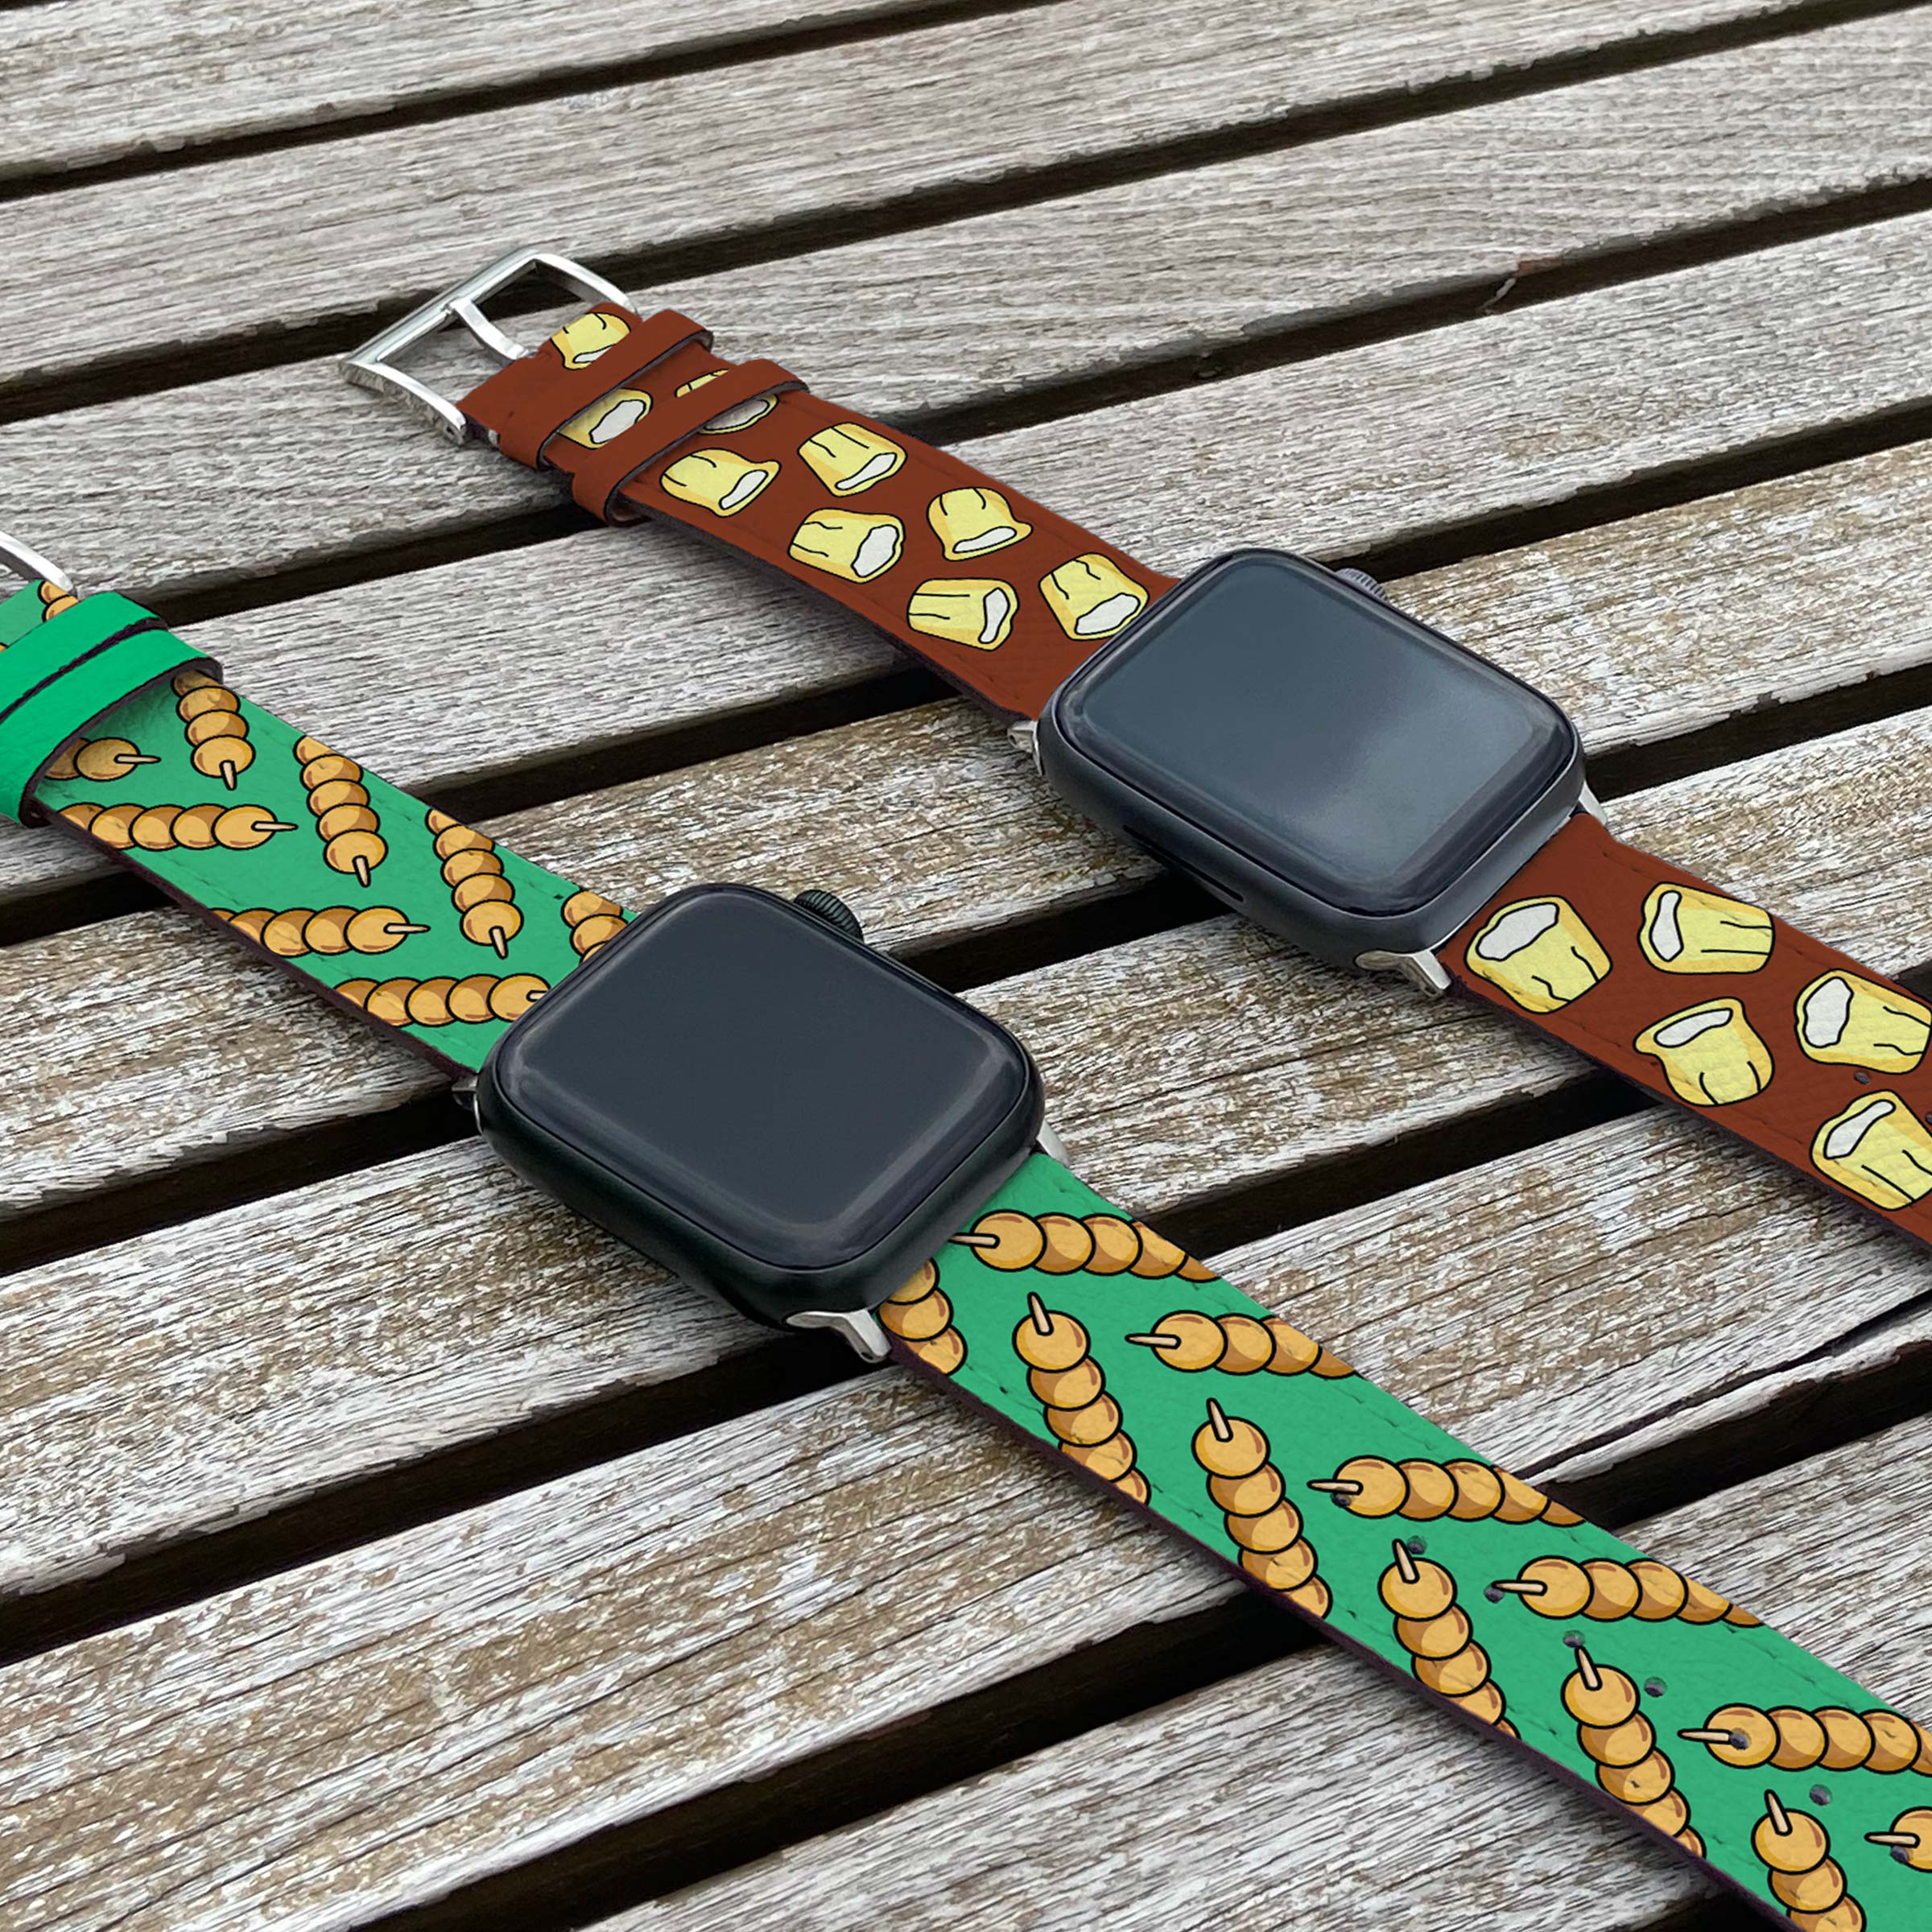 replacement watch bands-hermes apple watch錶帶-apple watch hermes-apple watch錶帶香港-alligator watch strap-apple watch真皮錶帶